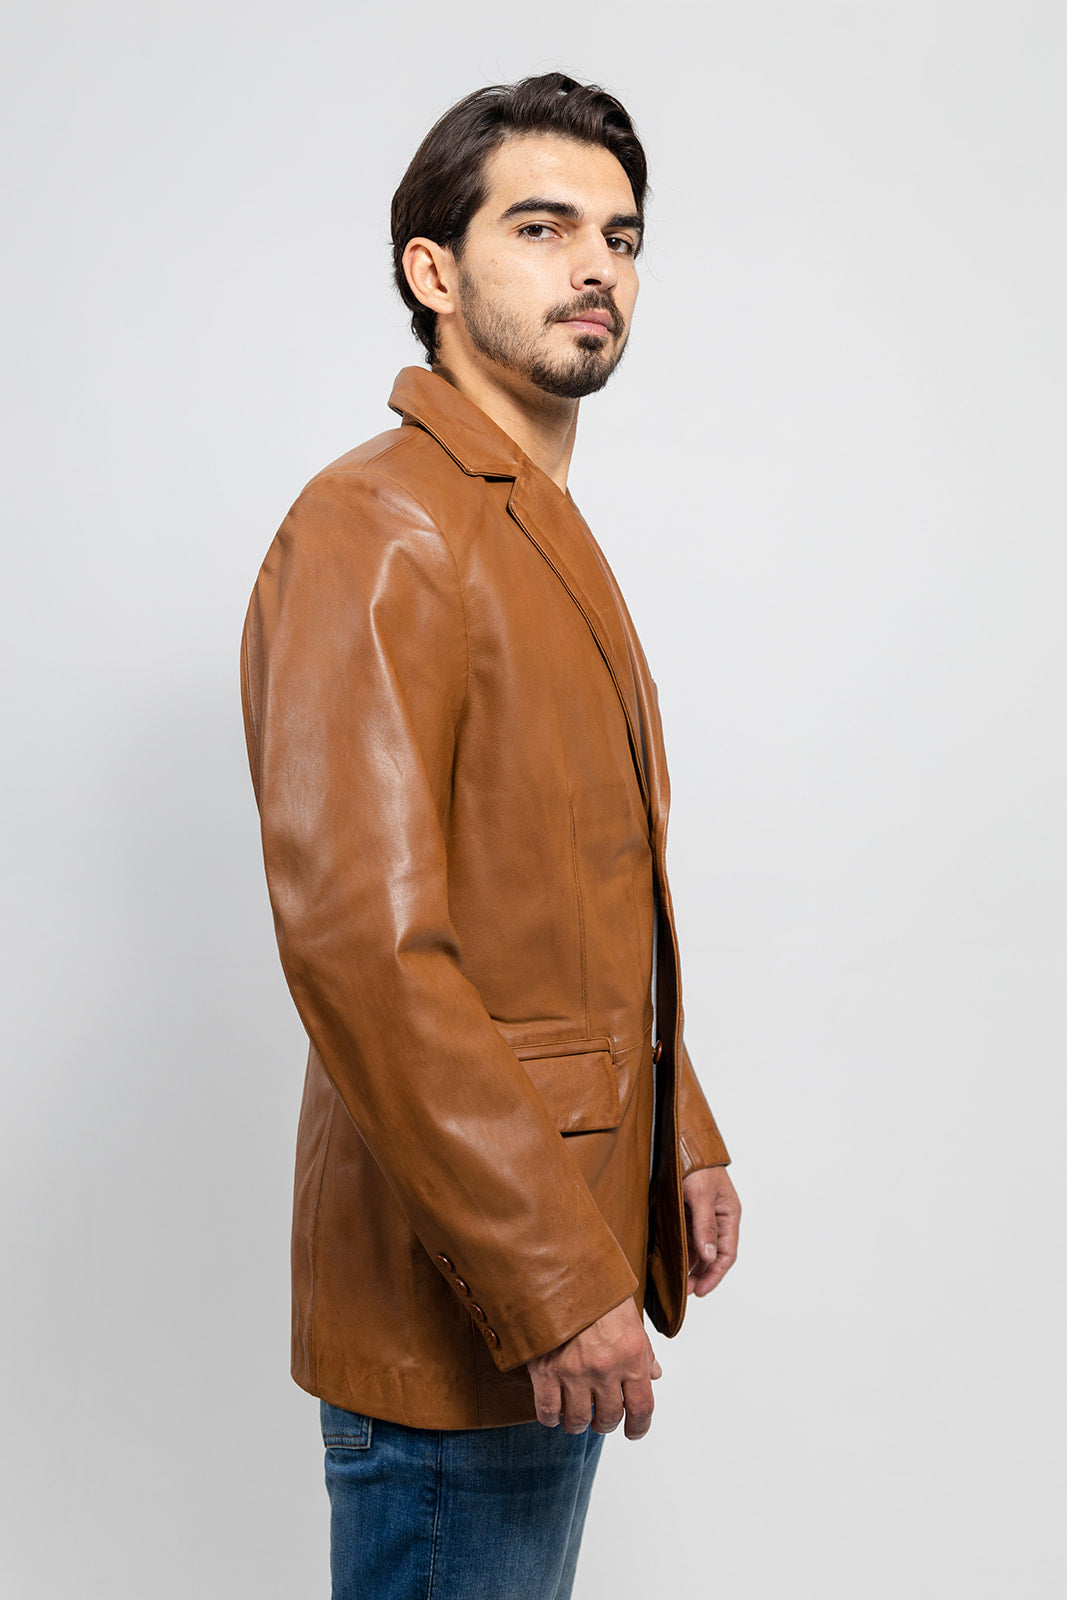 Esquire Mens Leather Jacket WHISKEY